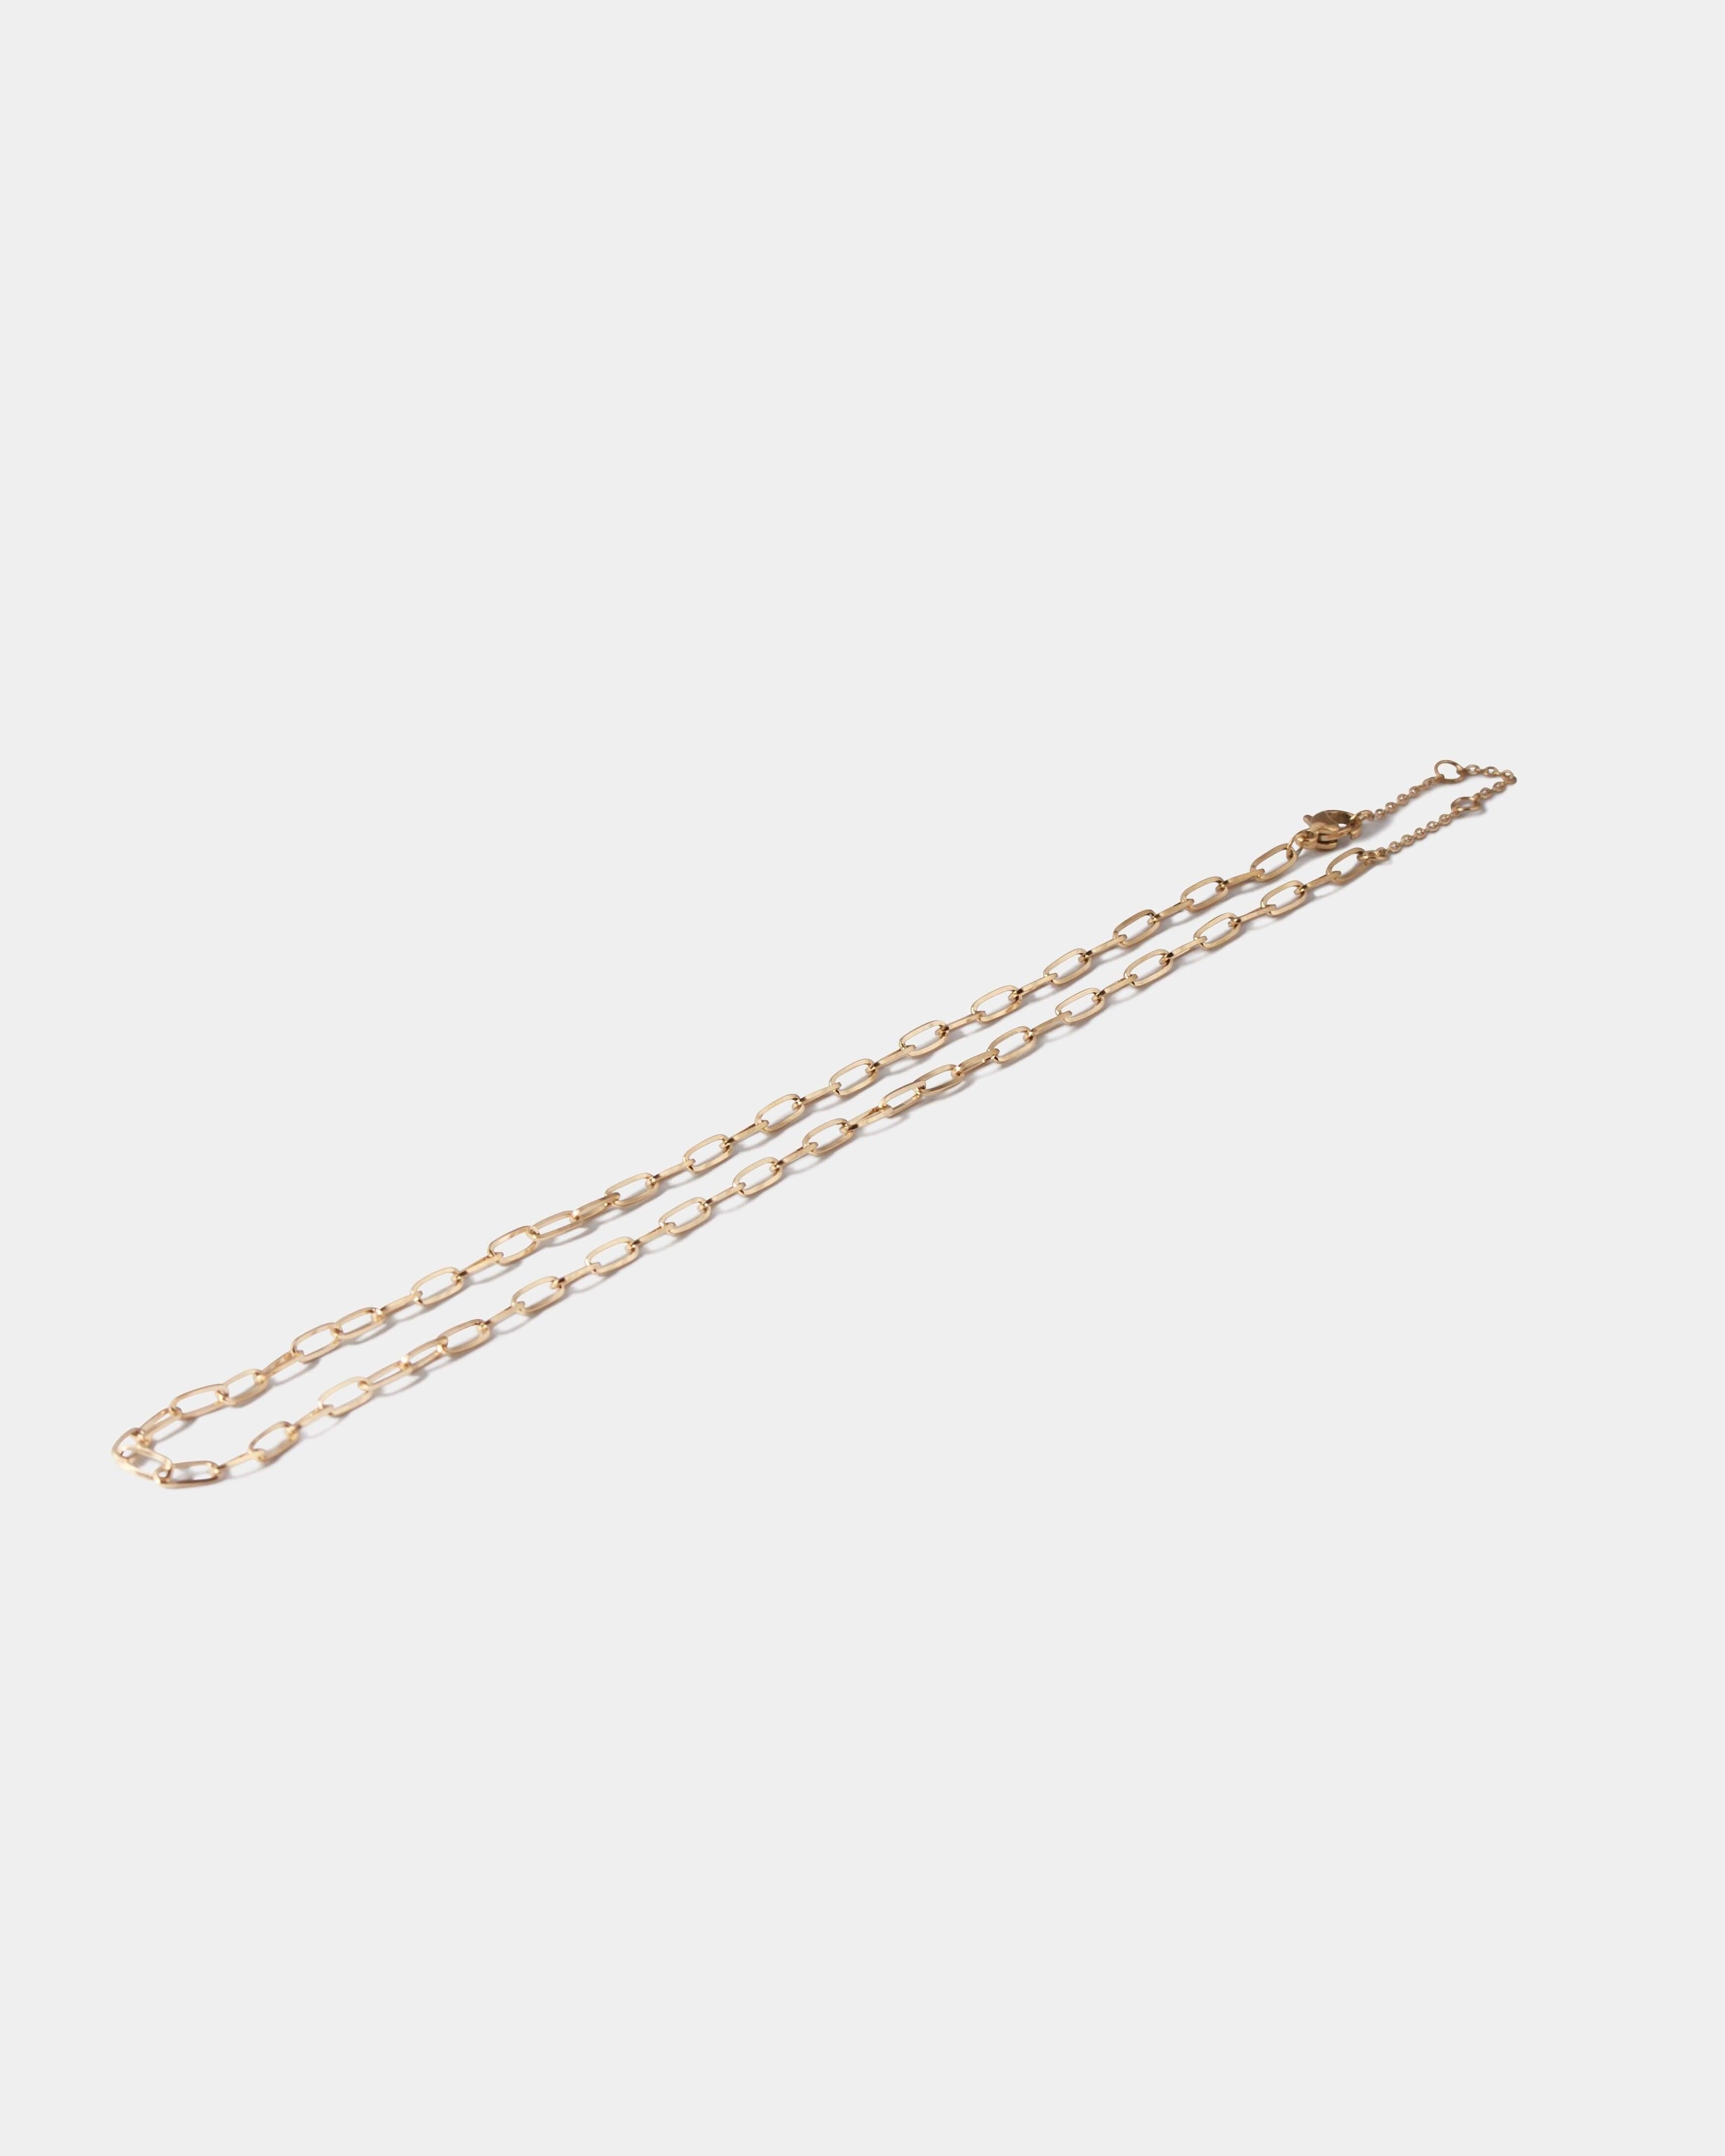 NARROW BOX CHAIN NECKLACE - LIMELY